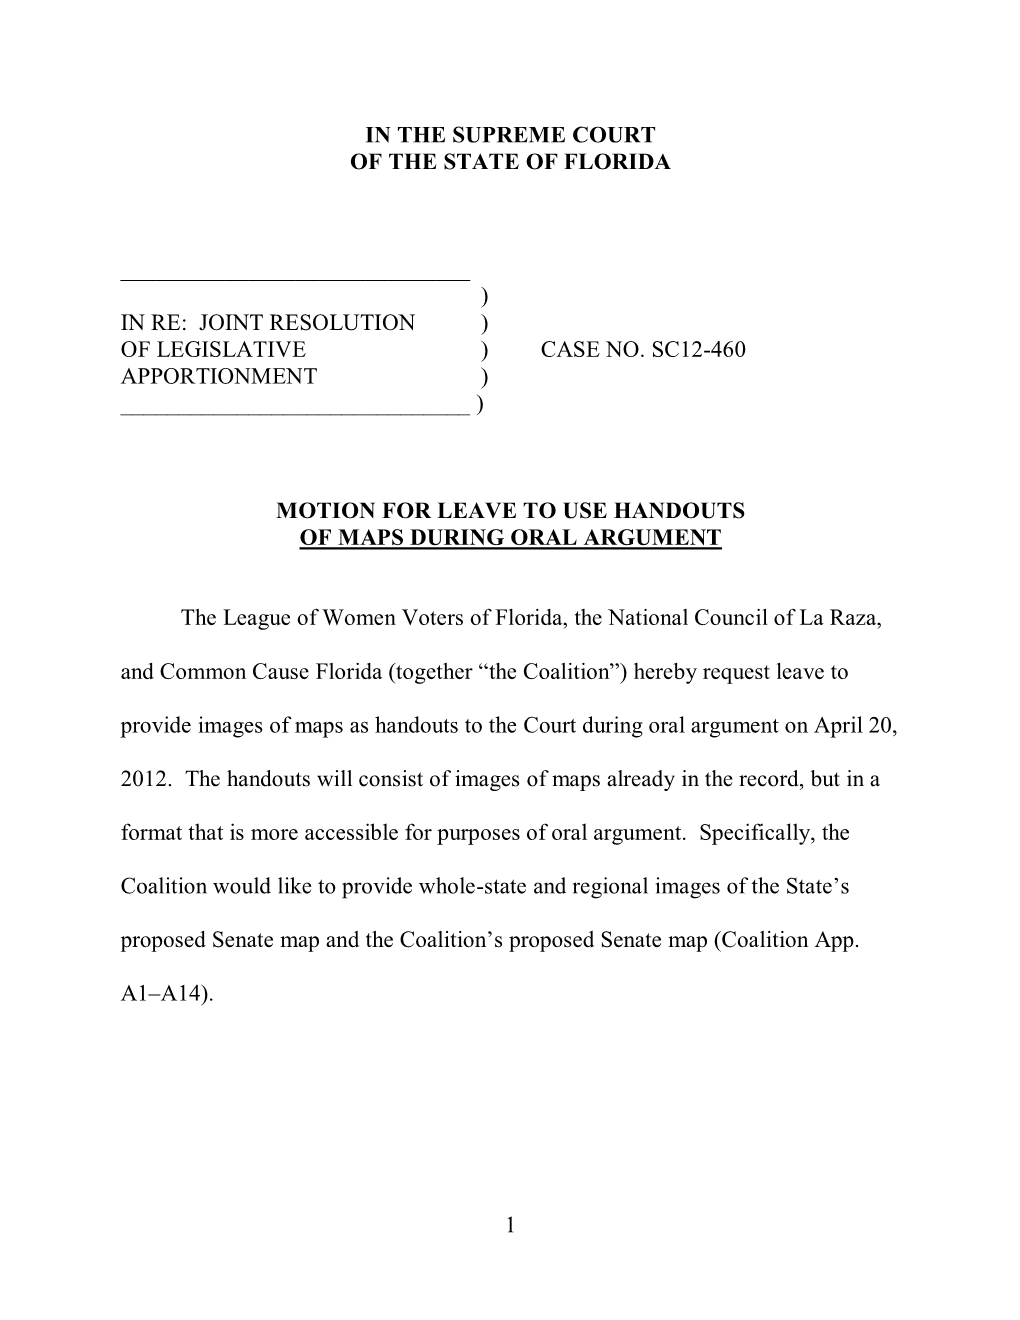 SC12-460 Motion for Leave by Florida League of Women Voters to Use